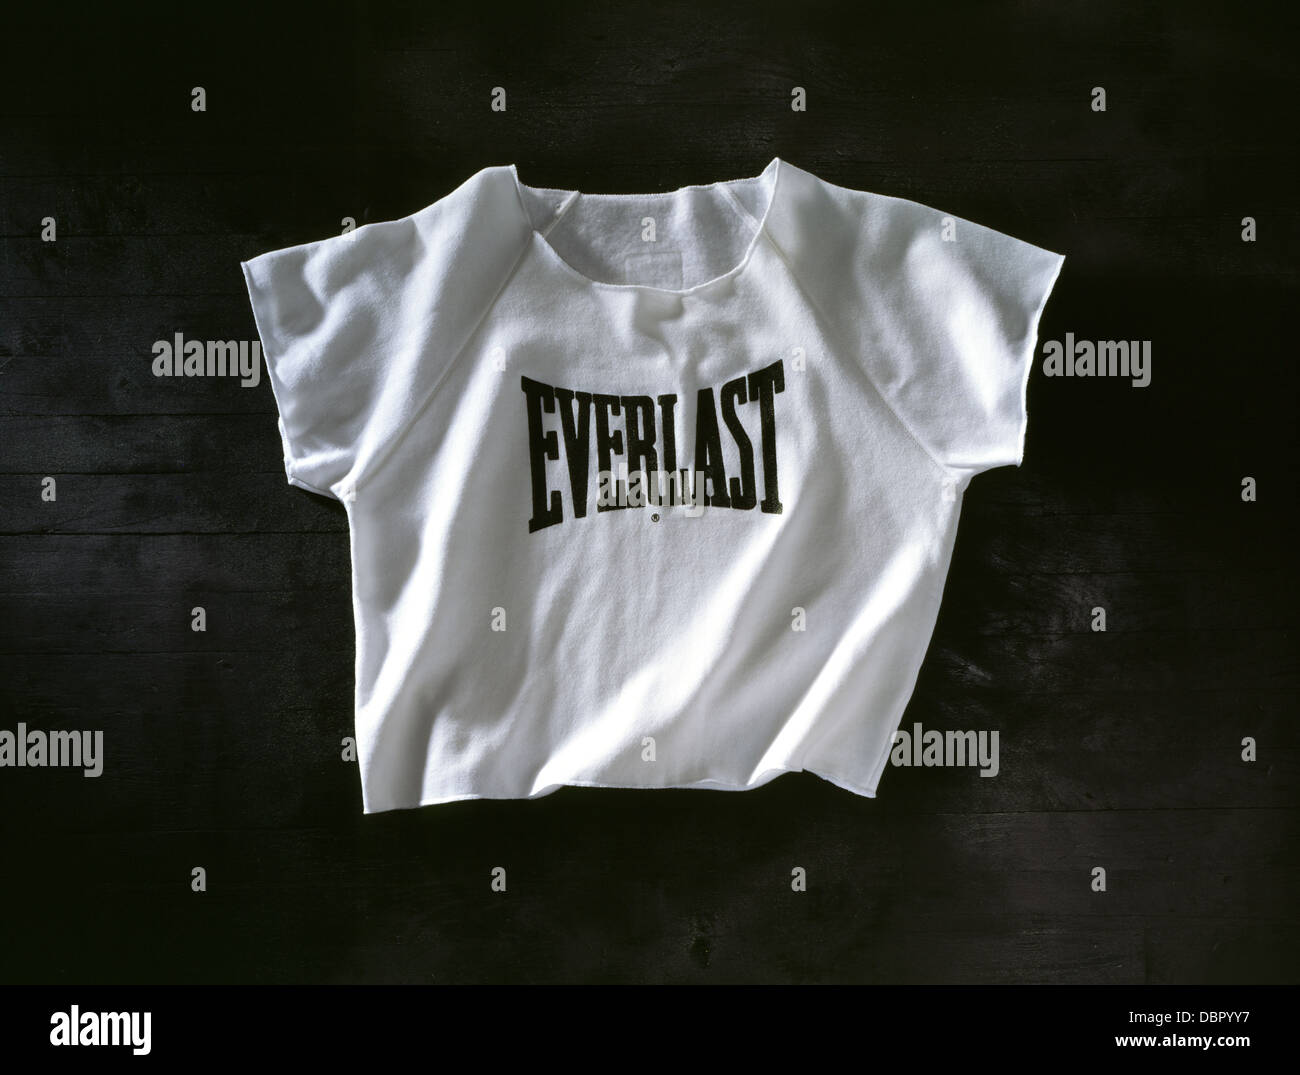 Everlast Sweat Tee blanc Banque D'Images